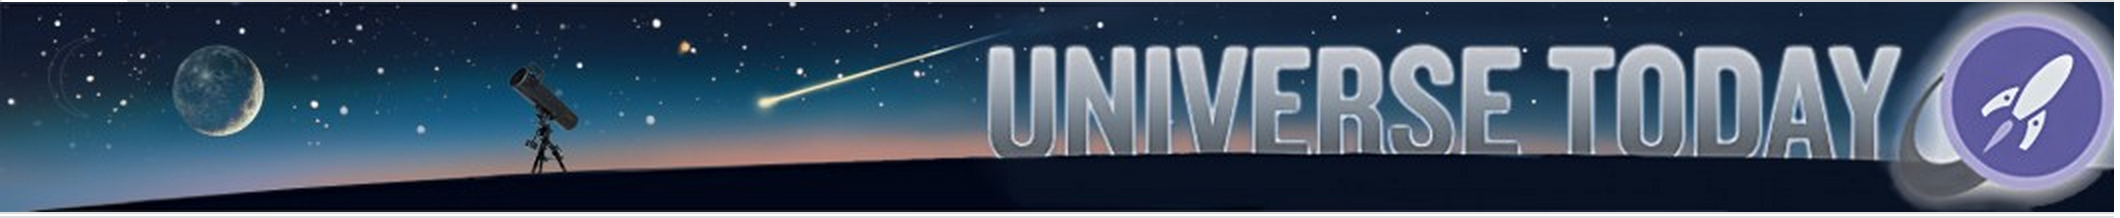 Universe Today header image